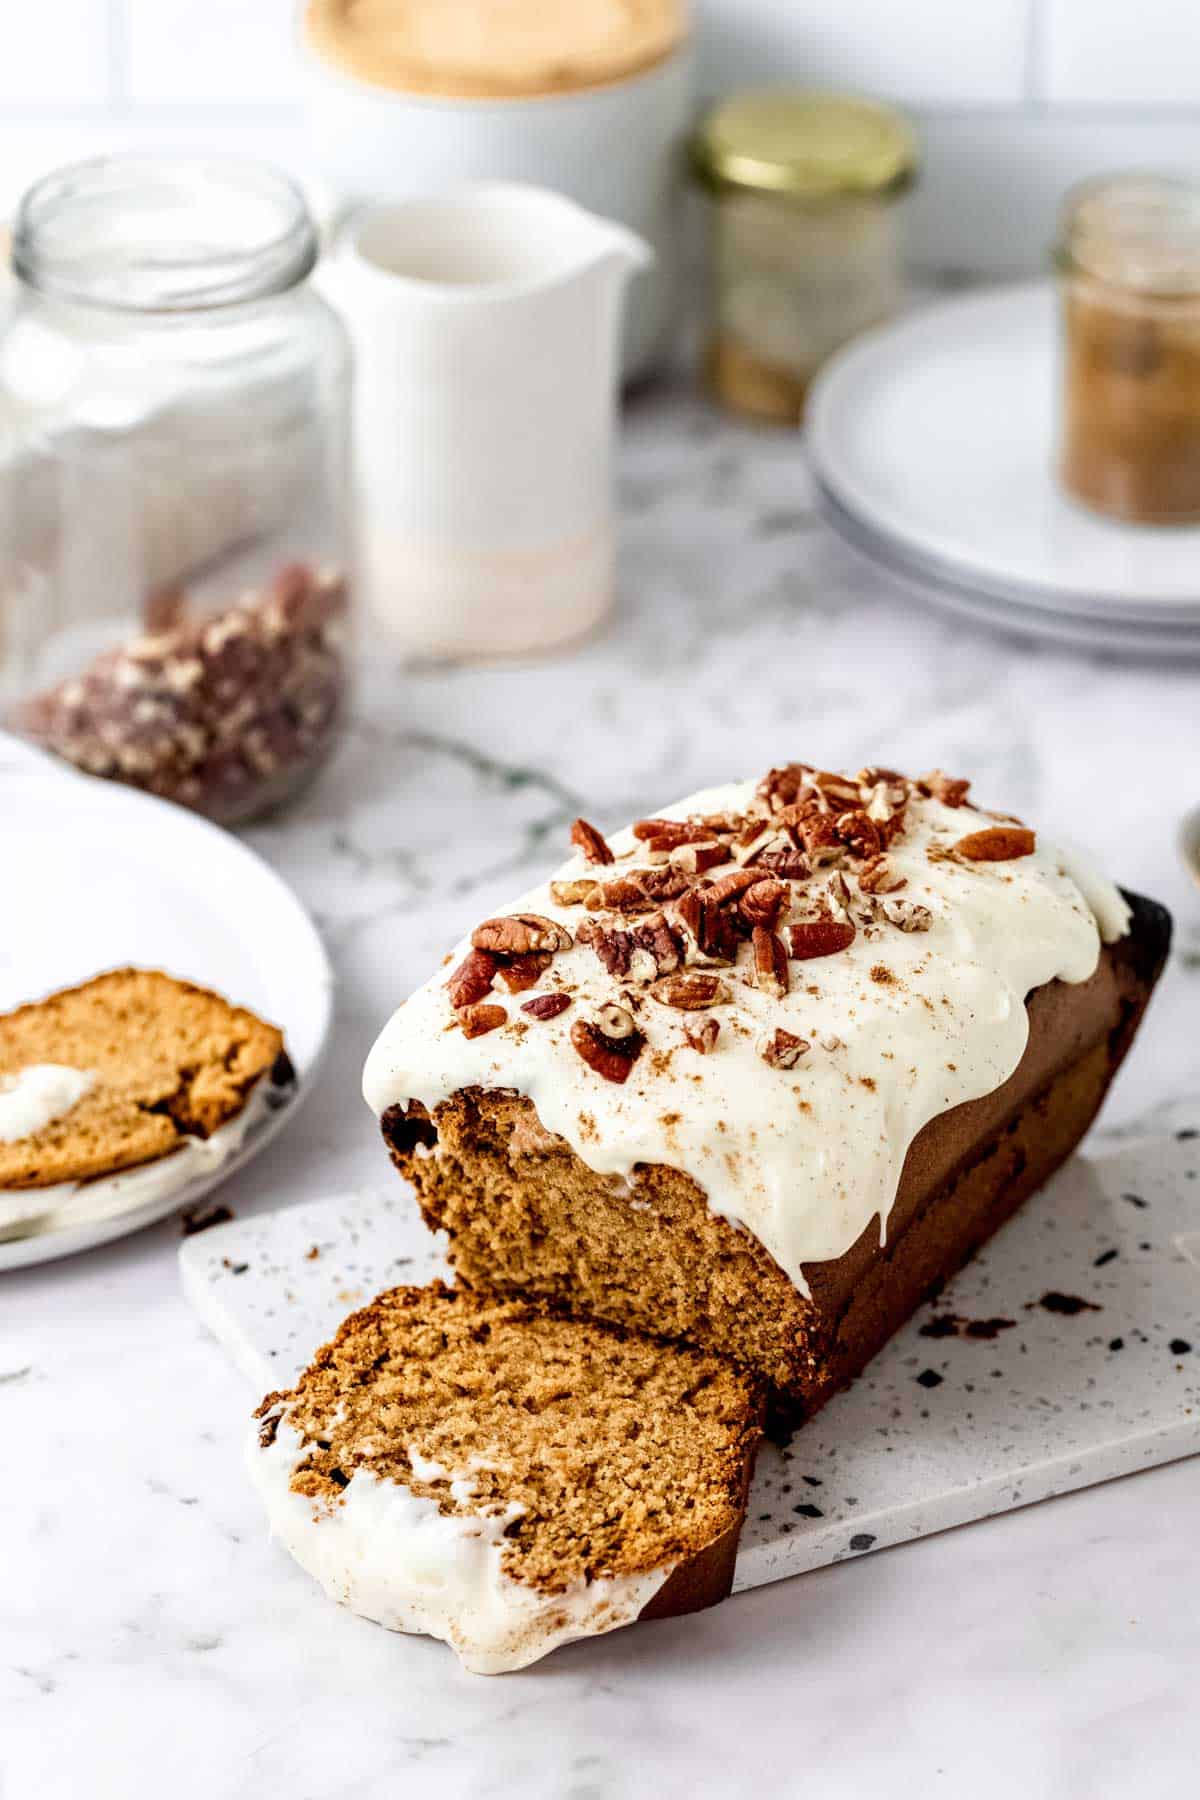 A gluten-free gingerbread loaf frosted with cream cheese icing and topped with pecan nuts, sliced on a white countertop.